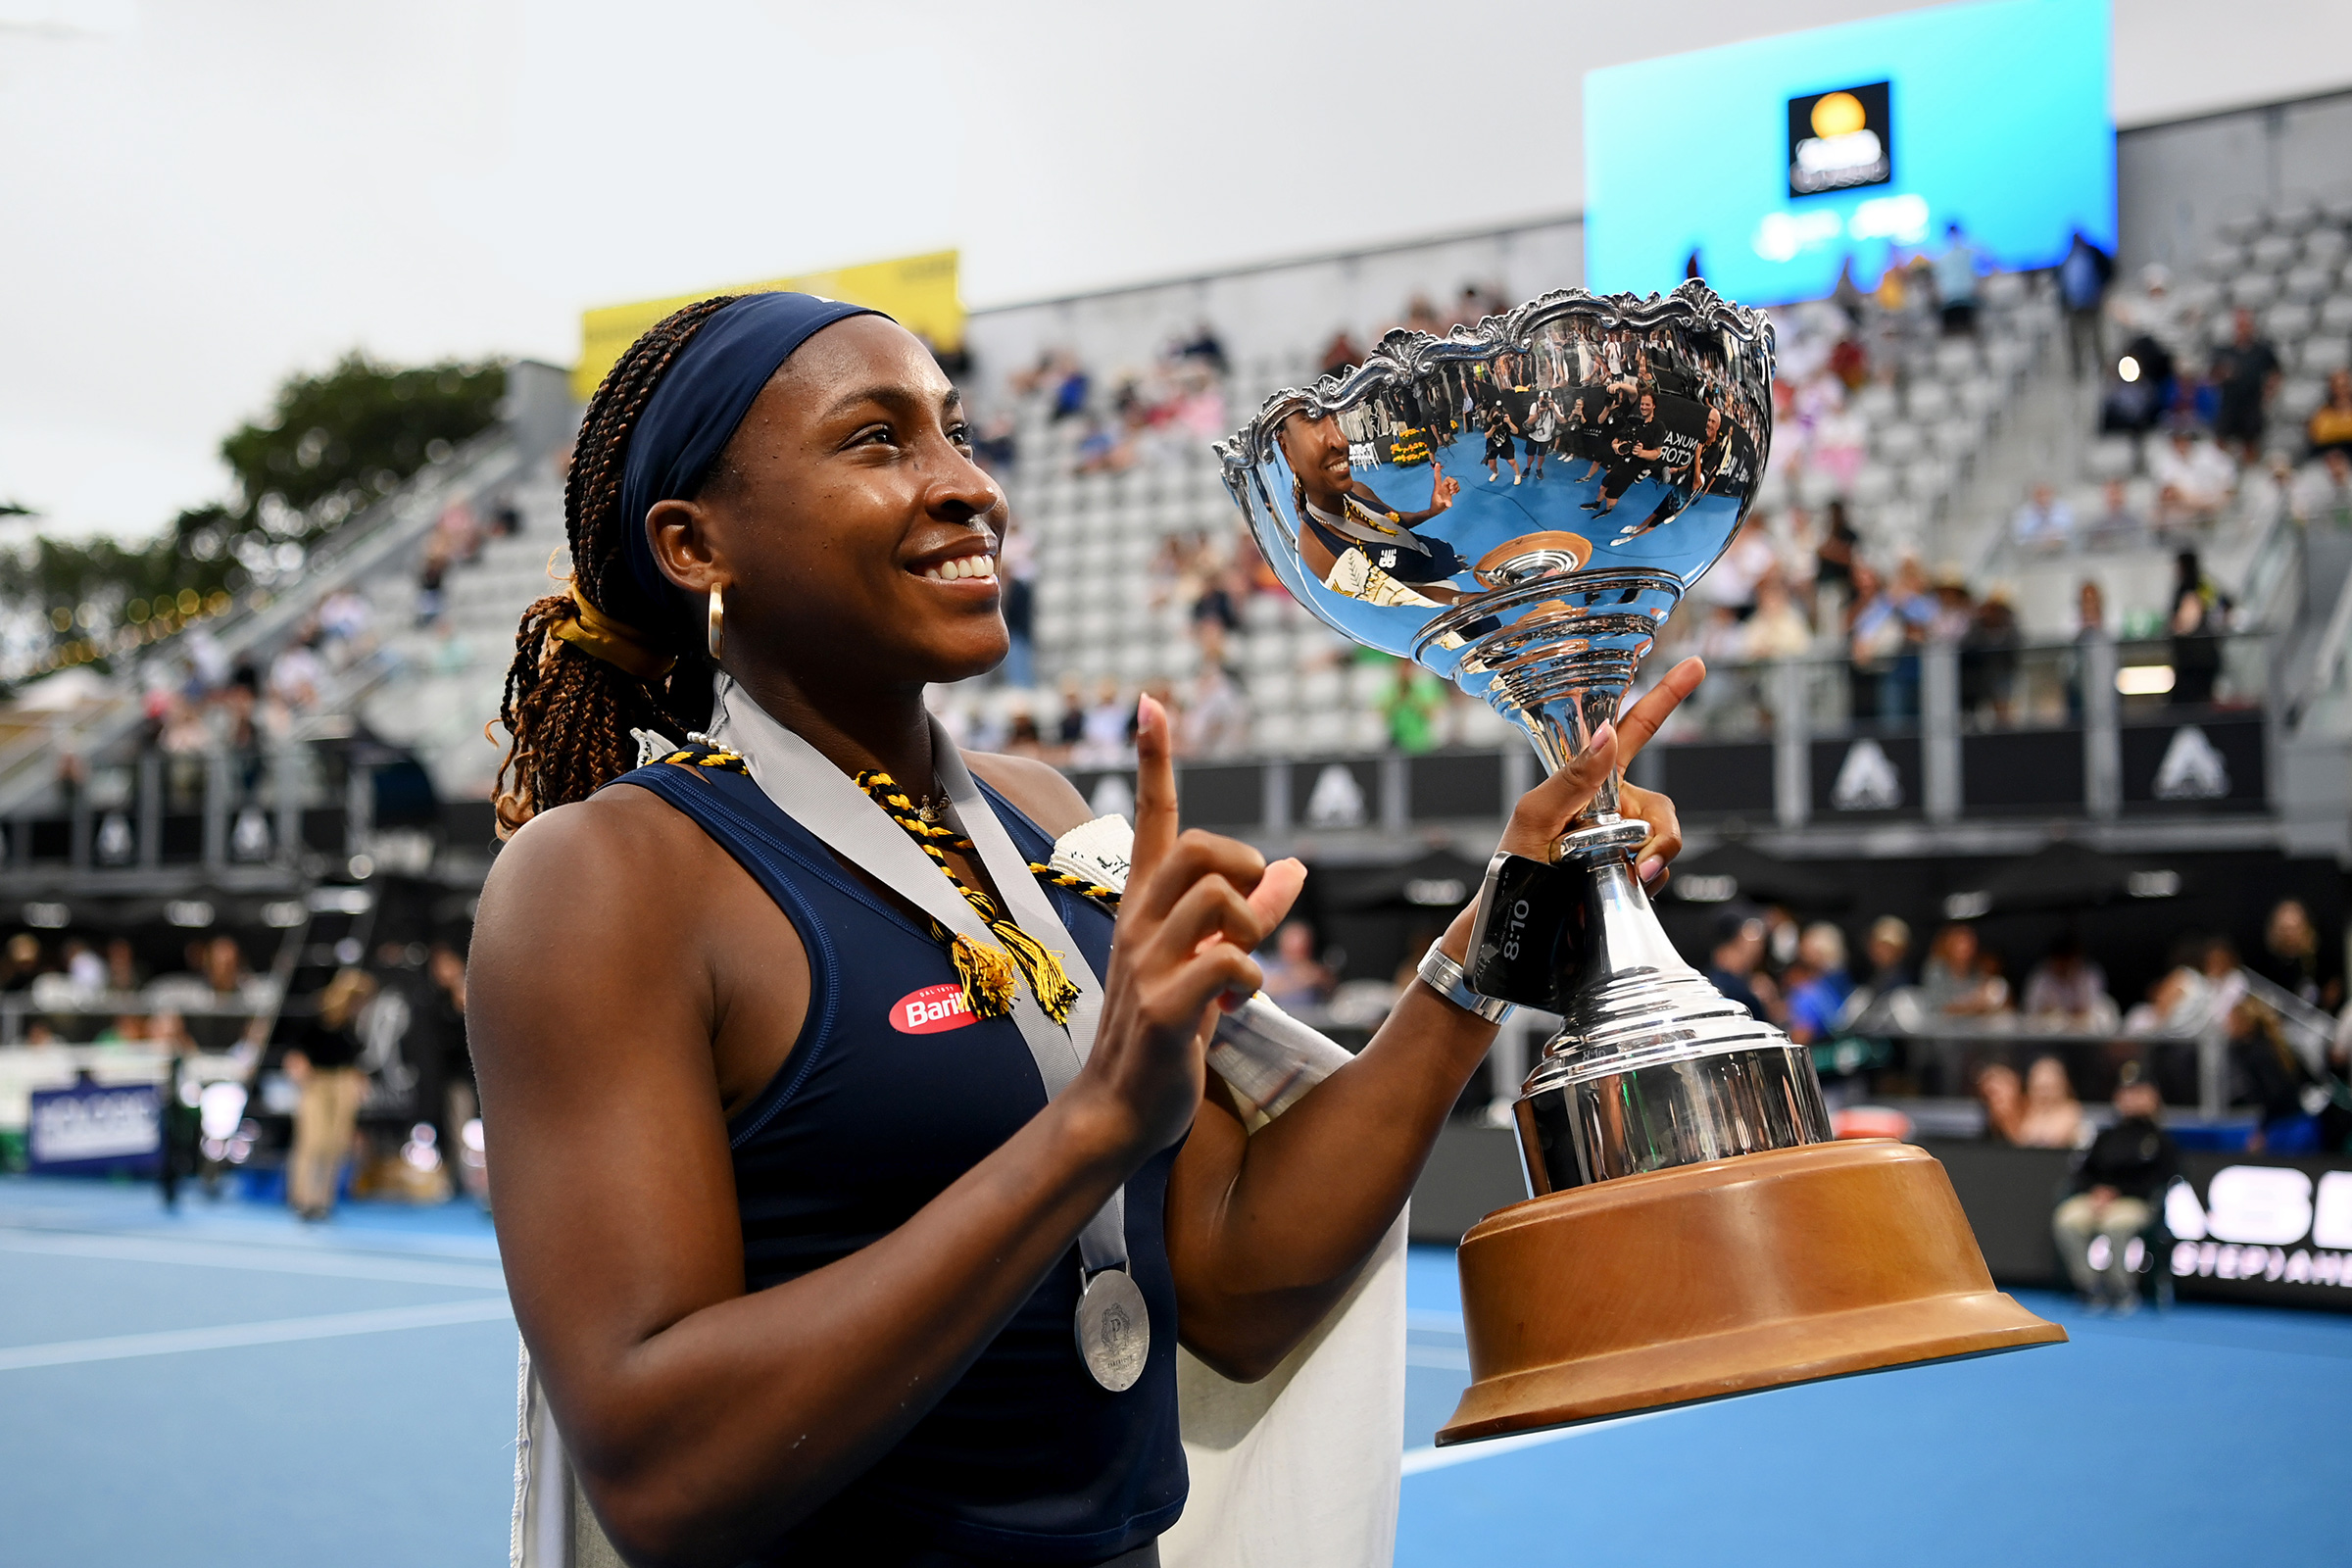 Defeating Ukraine’s Elina Svitolina, Gauff took home the trophy at the ASB Classic in Auckland in January (Hannah Peters—Getty Images)